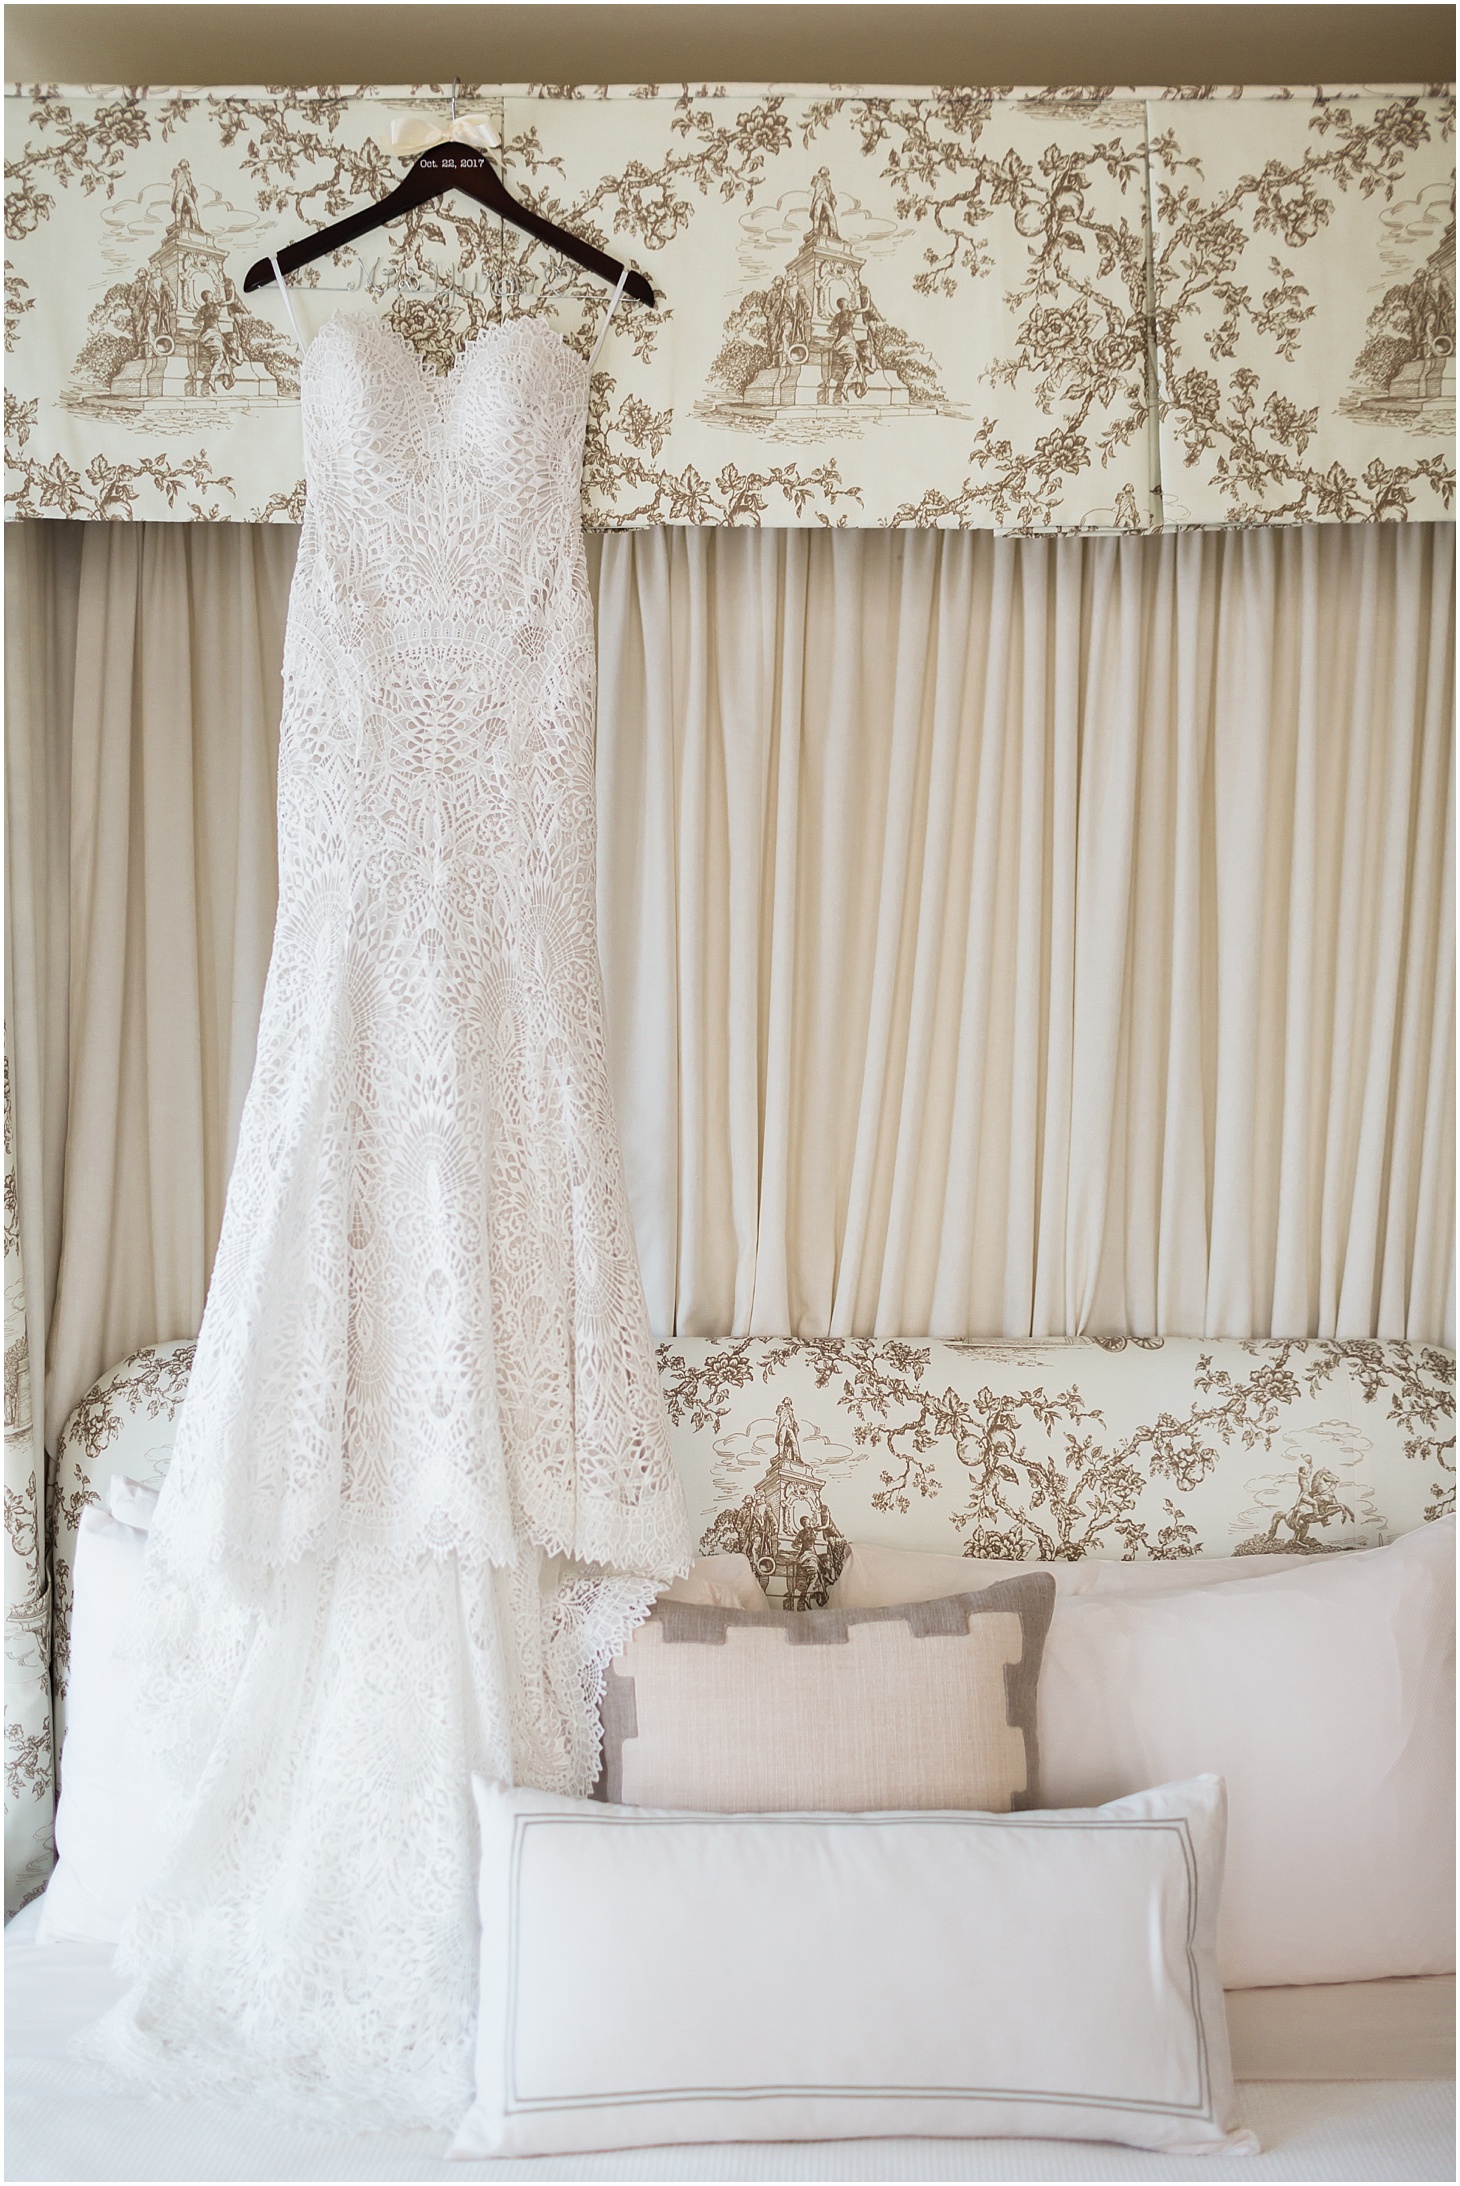 Watters Wedding Gown in Suite at the Hay-Adams Hotel, Industrial-Chic Wedding at Long View Gallery in DC, Sarah Bradshaw Photography, DC Wedding Photographer